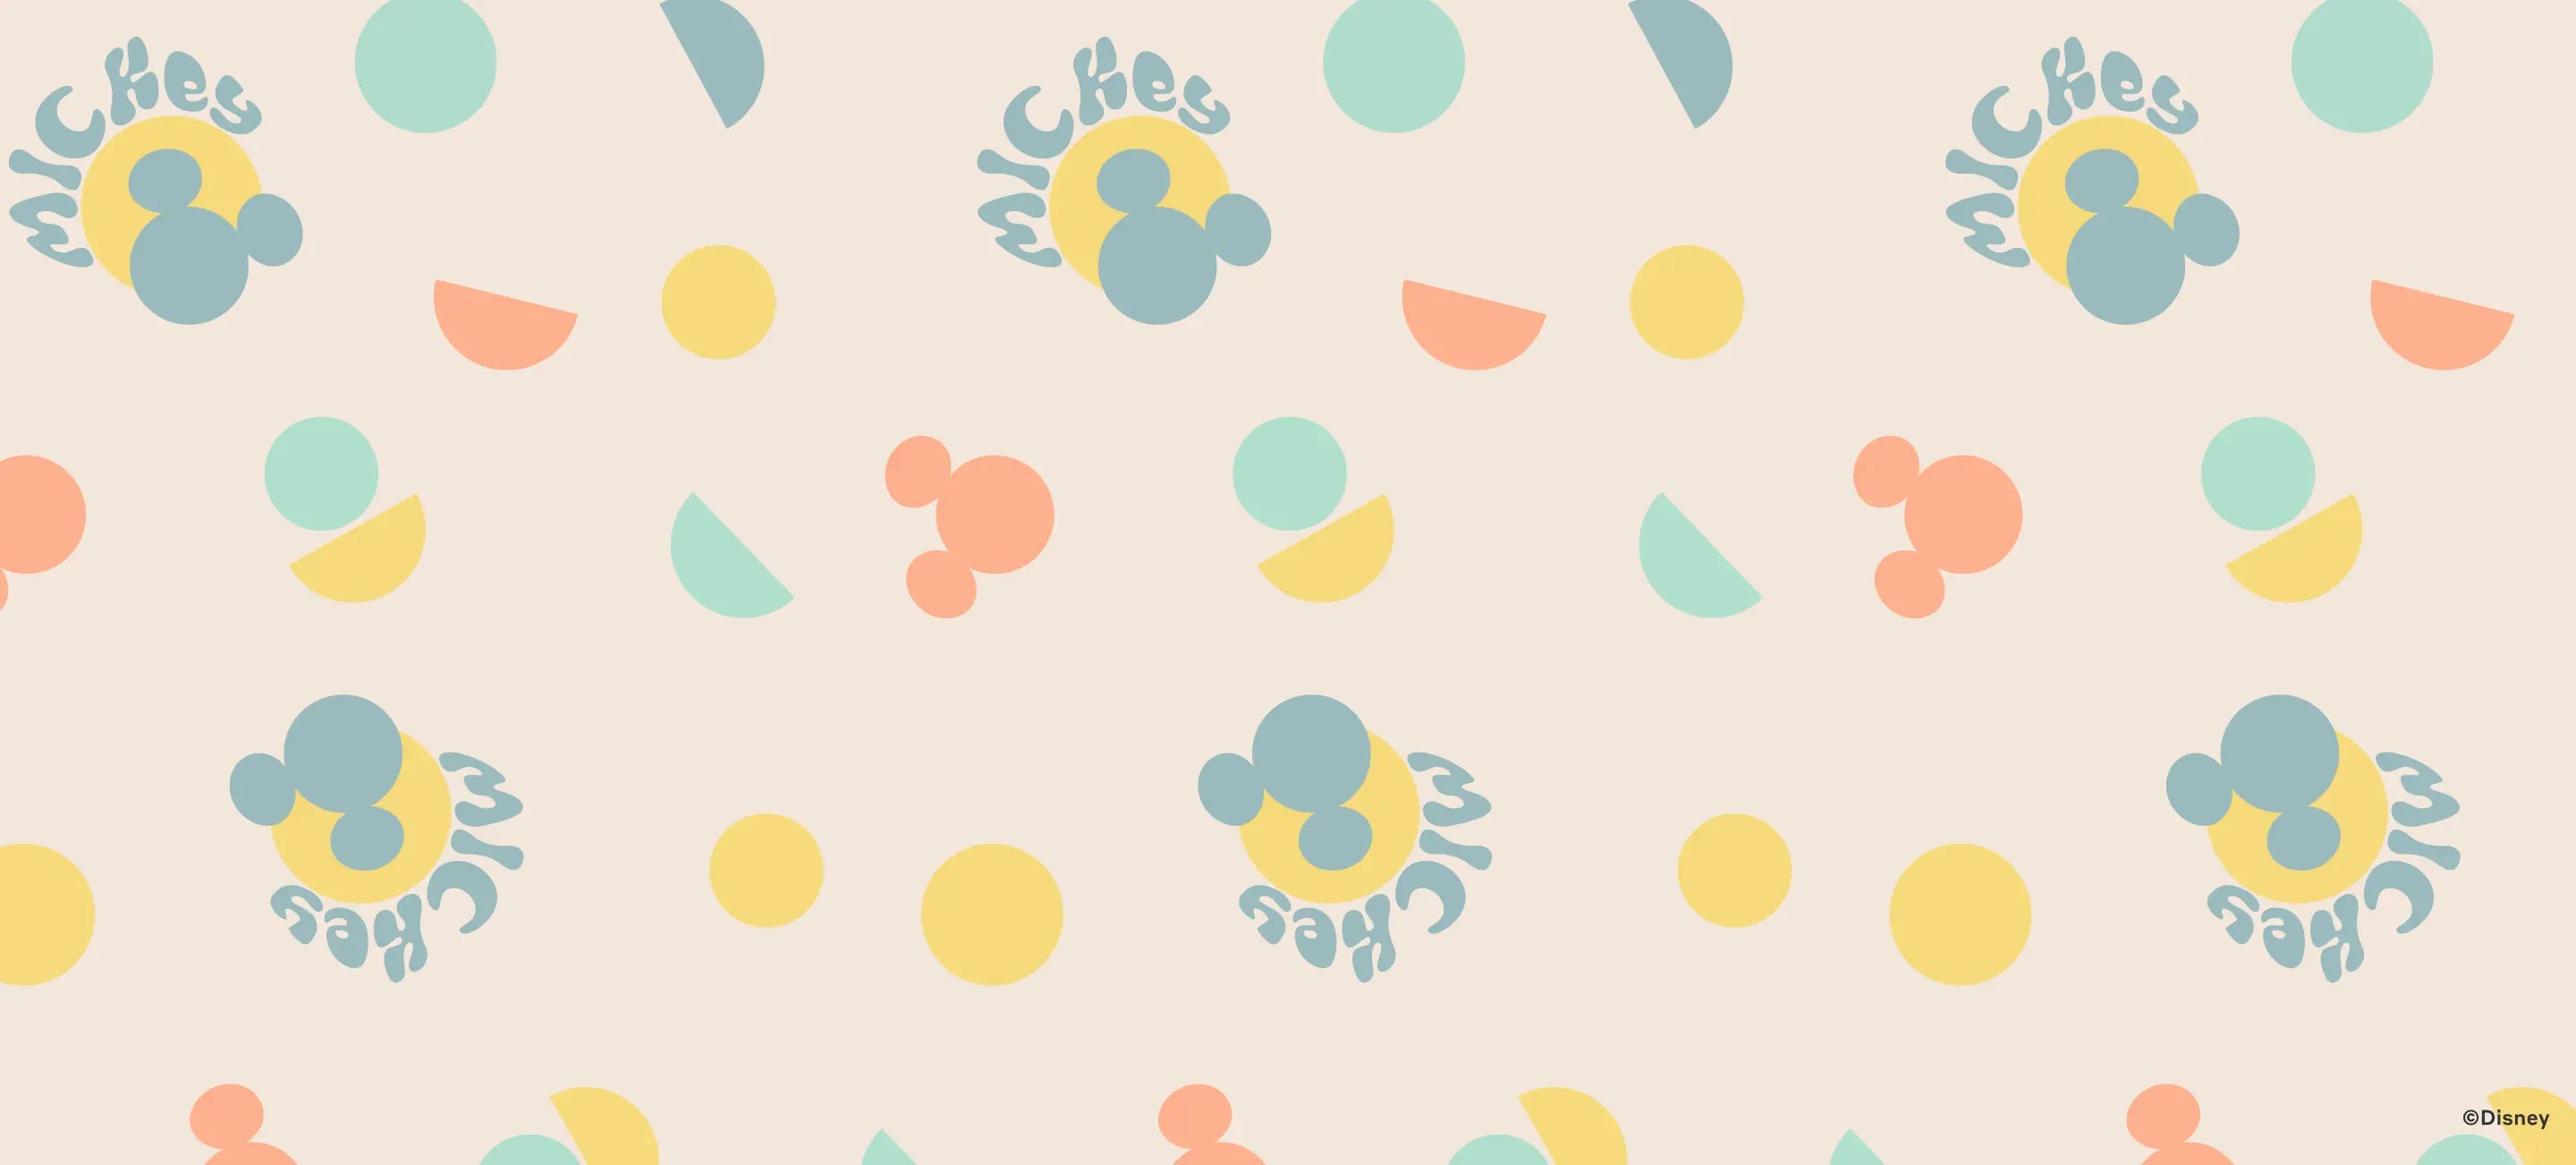 Disney Sunshine Collection hero background image with text: Early Access To The Disney Sunshine Collection - Coming Soon.